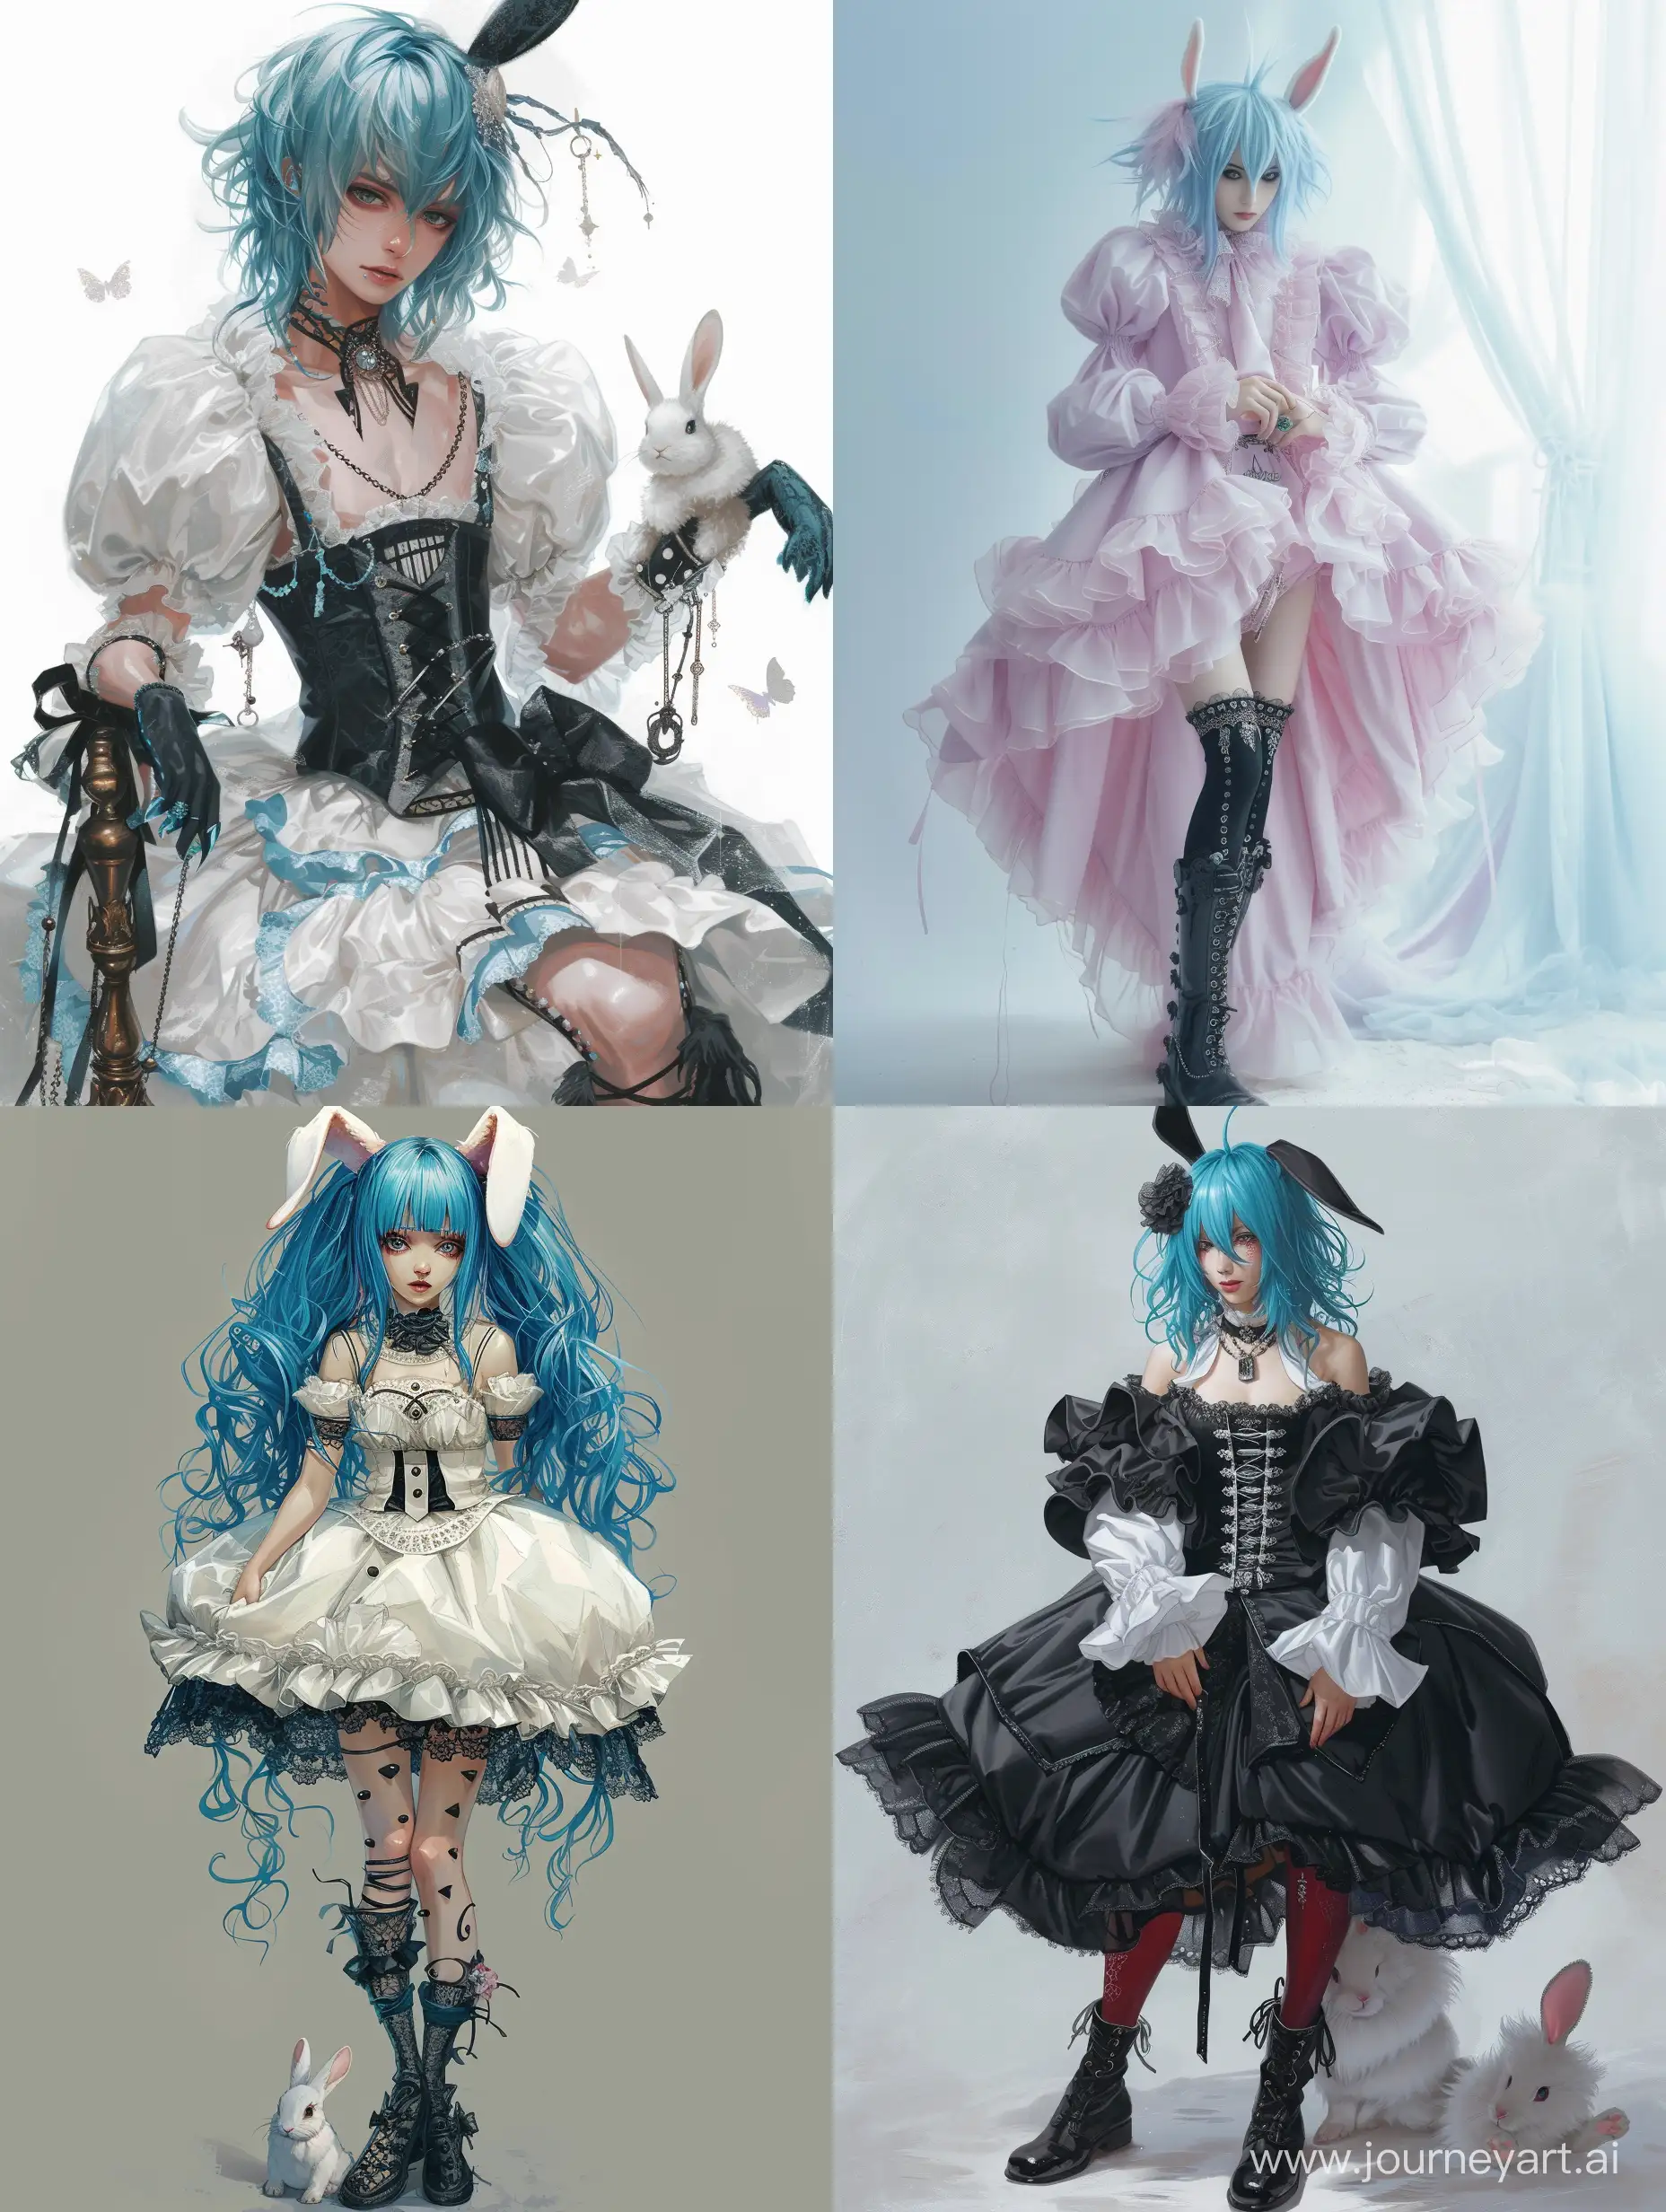 Enchanting-Pastel-Goth-Anime-Character-with-Blue-Hair-and-Magical-Rabbit-in-Puffy-Dress